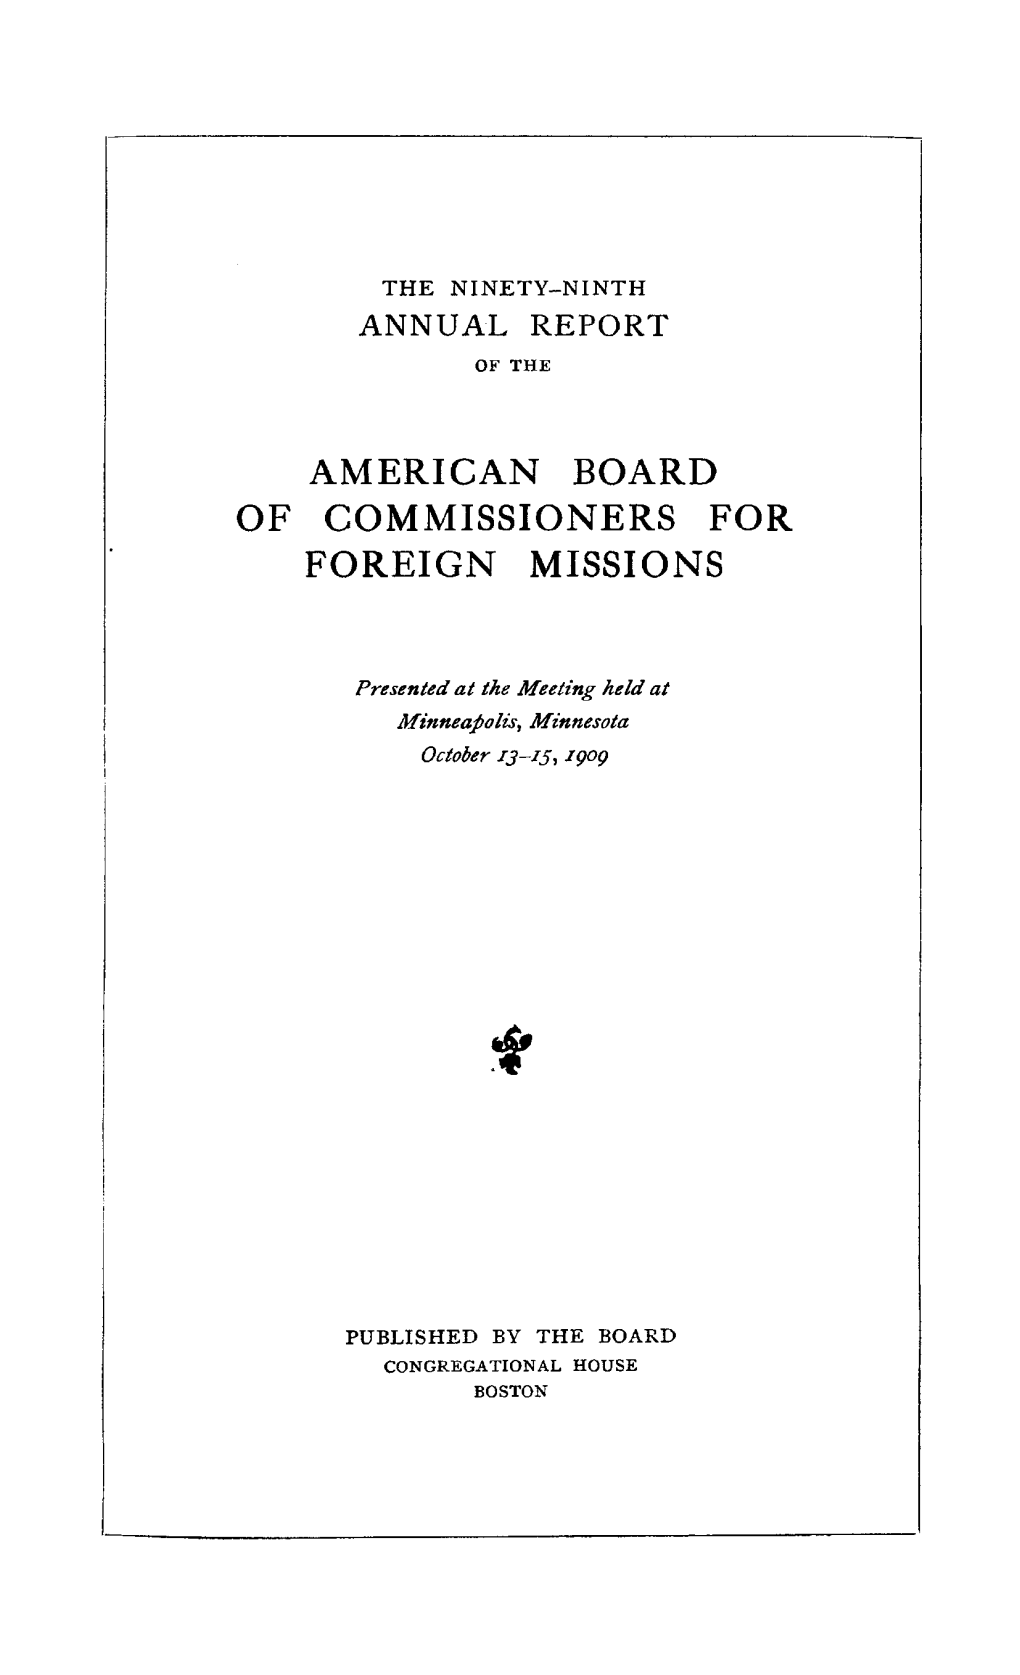 American Board of Commissioners for Foreign Missions $